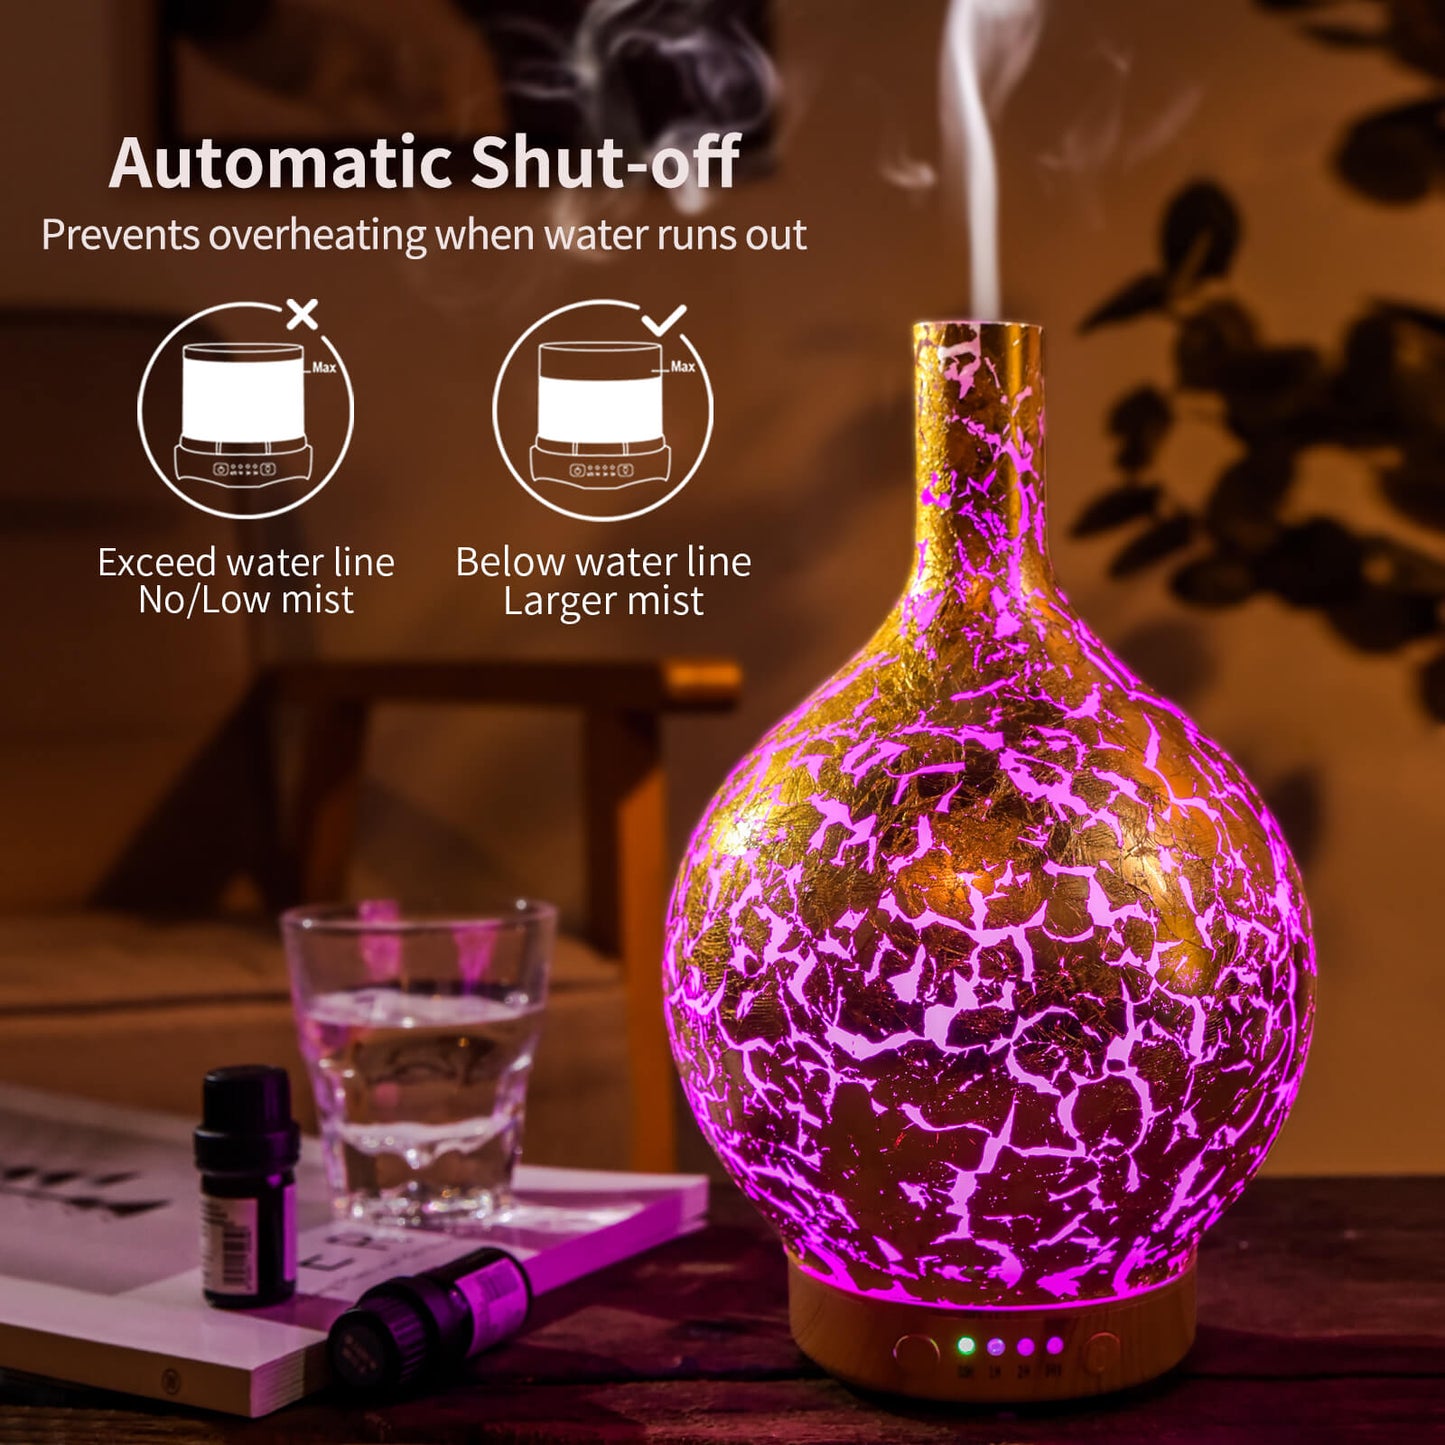 Porseme Gold Plated Essential Oil Diffuser Glass Aromatherapy Ultrasonic Humidifier, Auto Shut-Off,Timer Setting, BPA Free,Aroma Decoration for Home,Office,Gym,Spa,Premium Gift 100ml